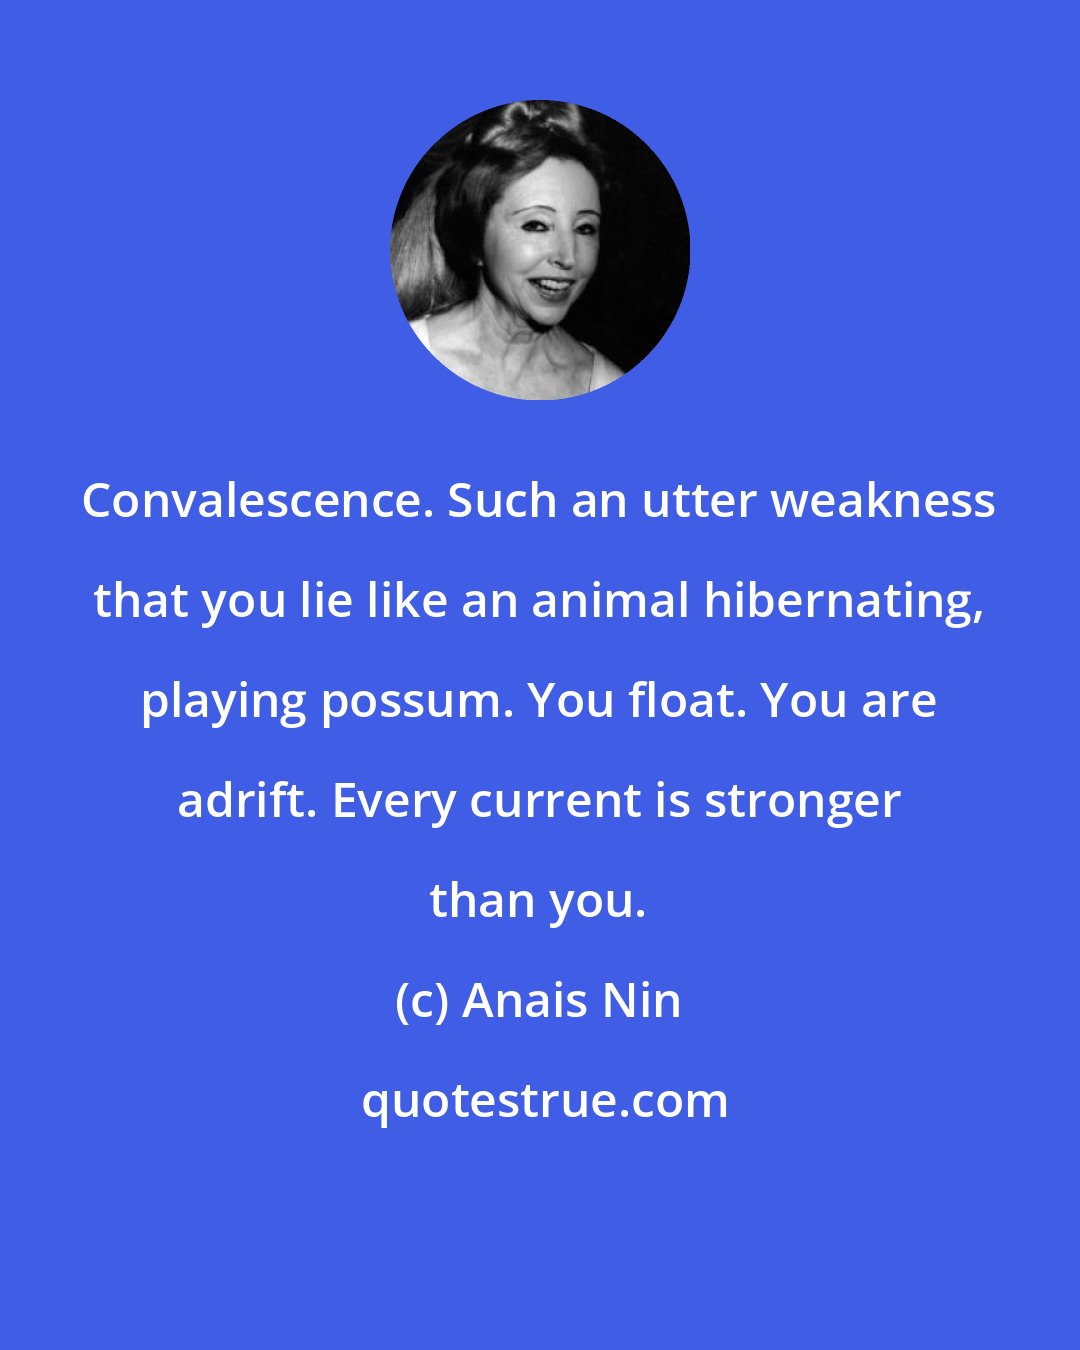 Anais Nin: Convalescence. Such an utter weakness that you lie like an animal hibernating, playing possum. You float. You are adrift. Every current is stronger than you.